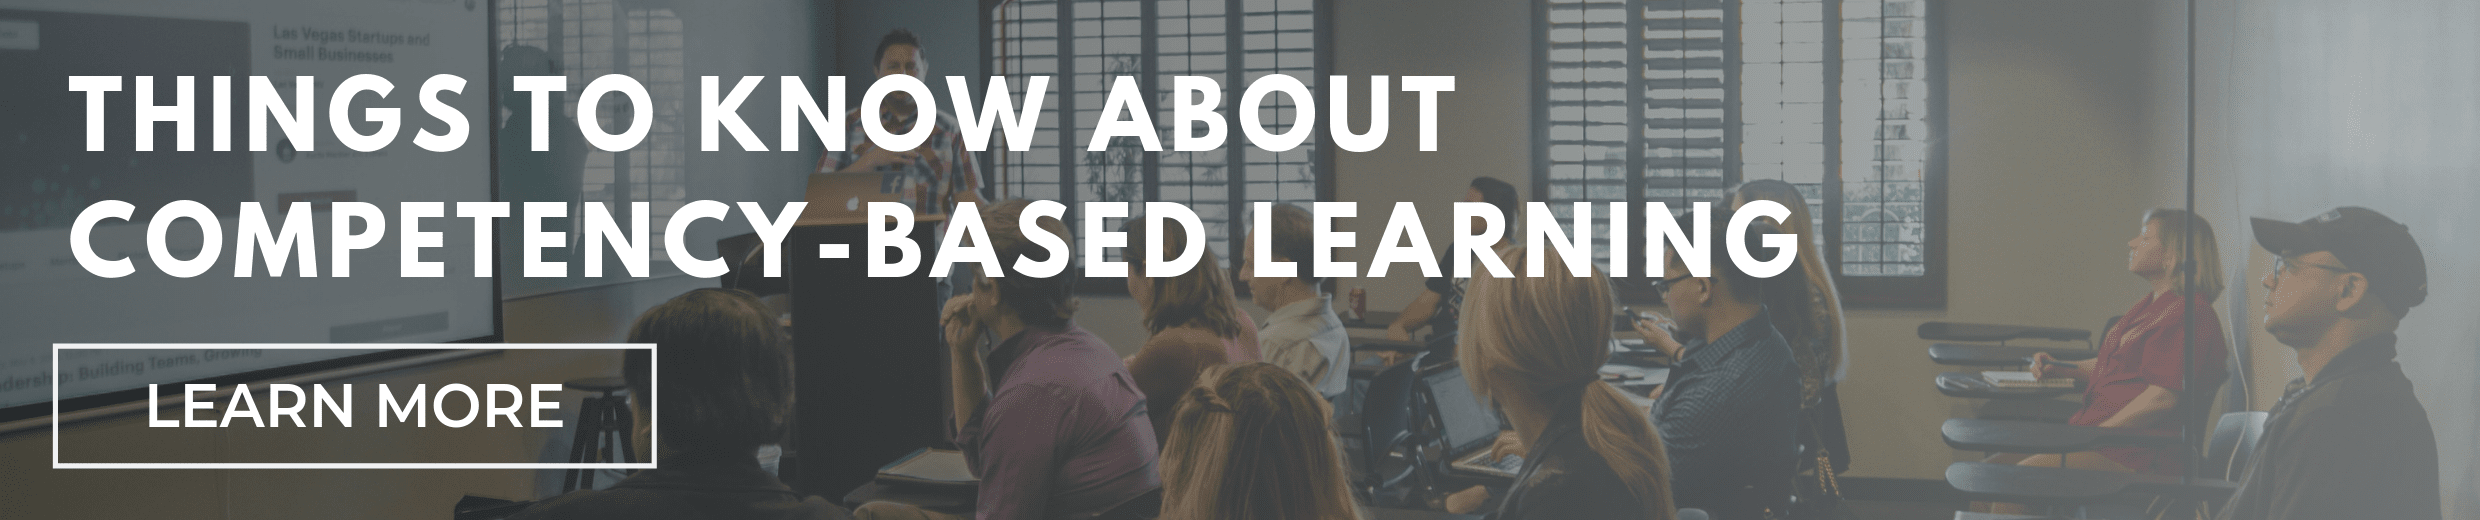 6 Things to Know About Competency-Based Learning